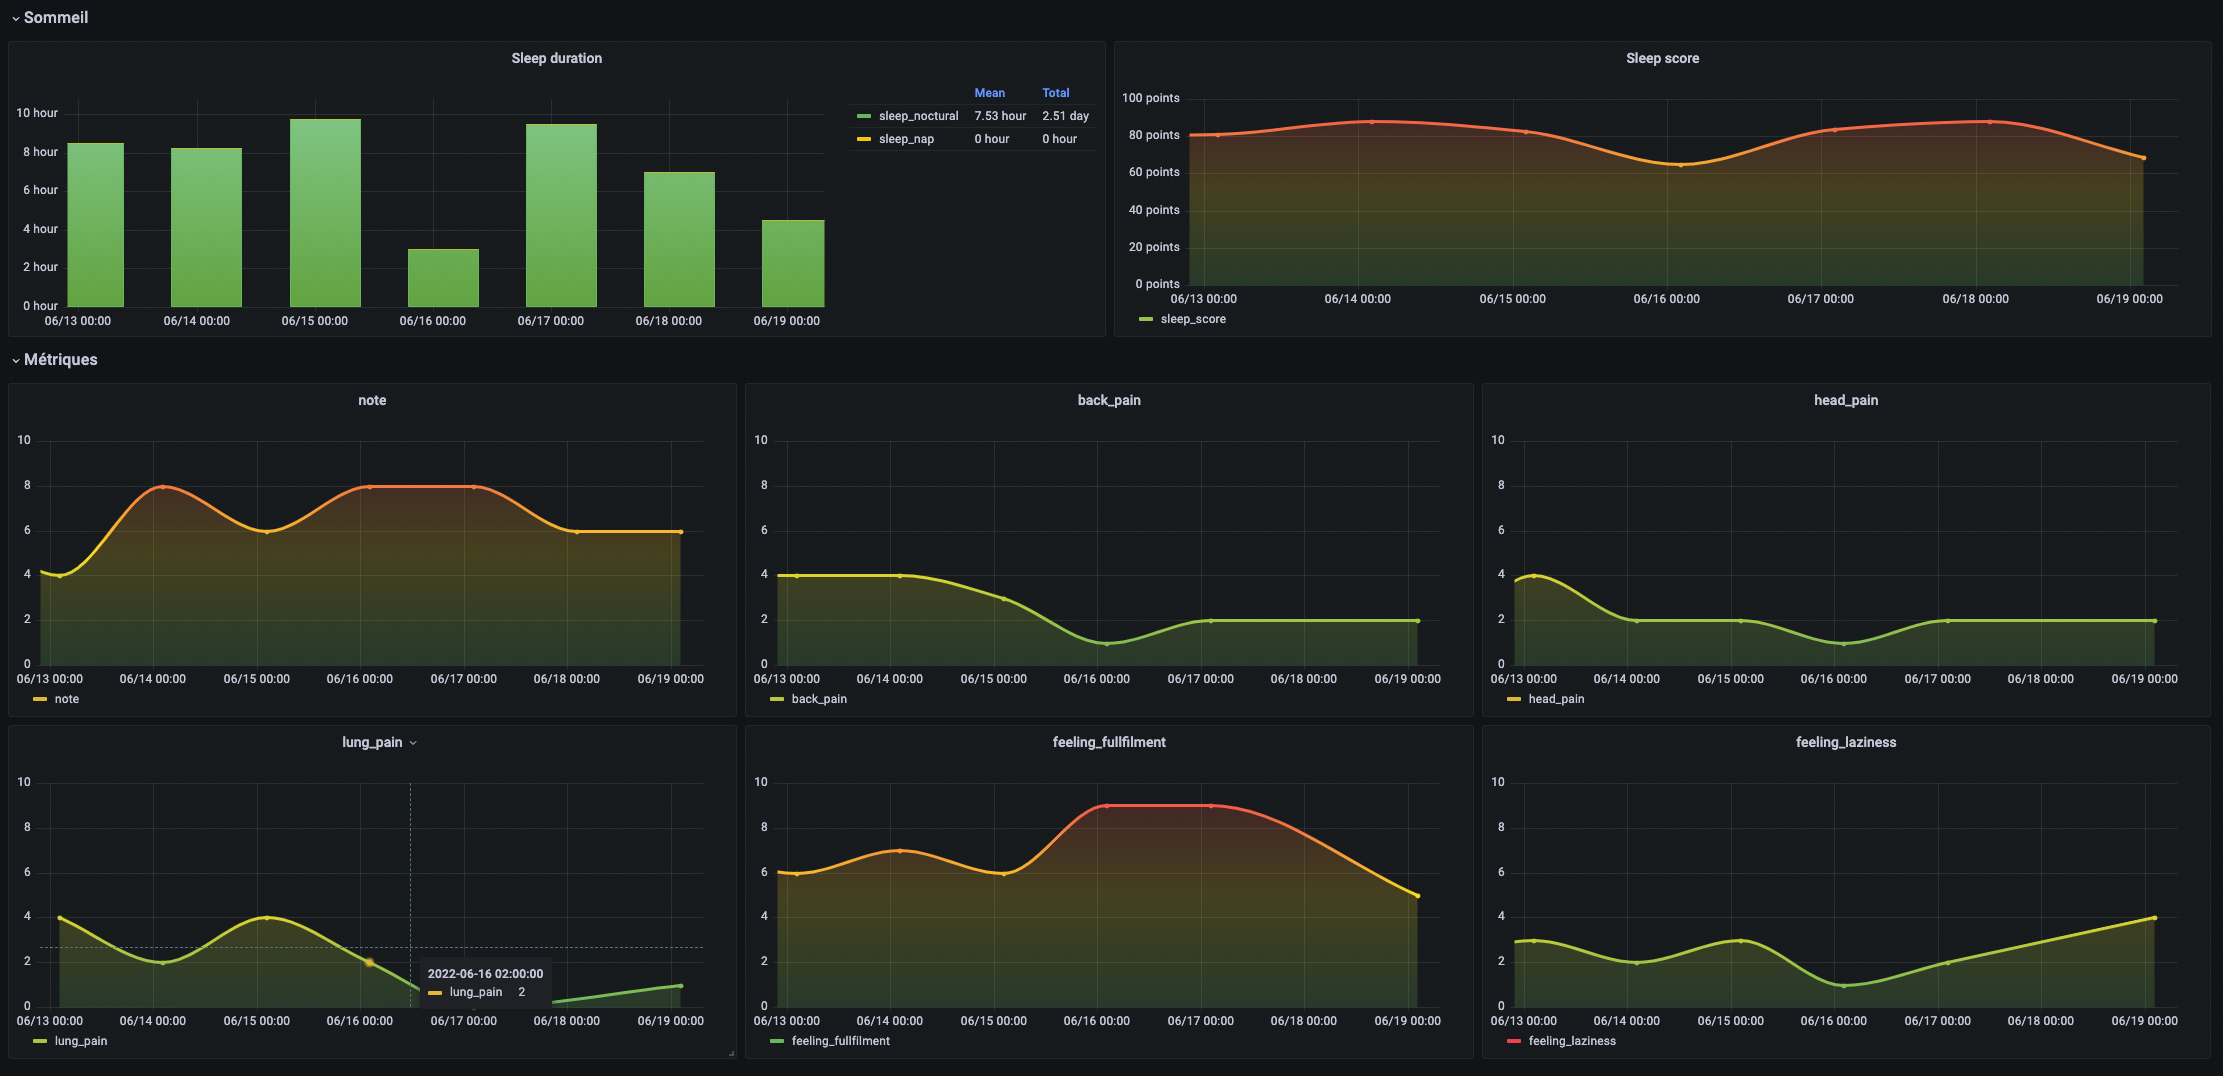 Grafana dashboard of clouedoc's health, made using the data produced by the postgresql-obsidian plugin. It features charts of an ok-ish lifestyle.